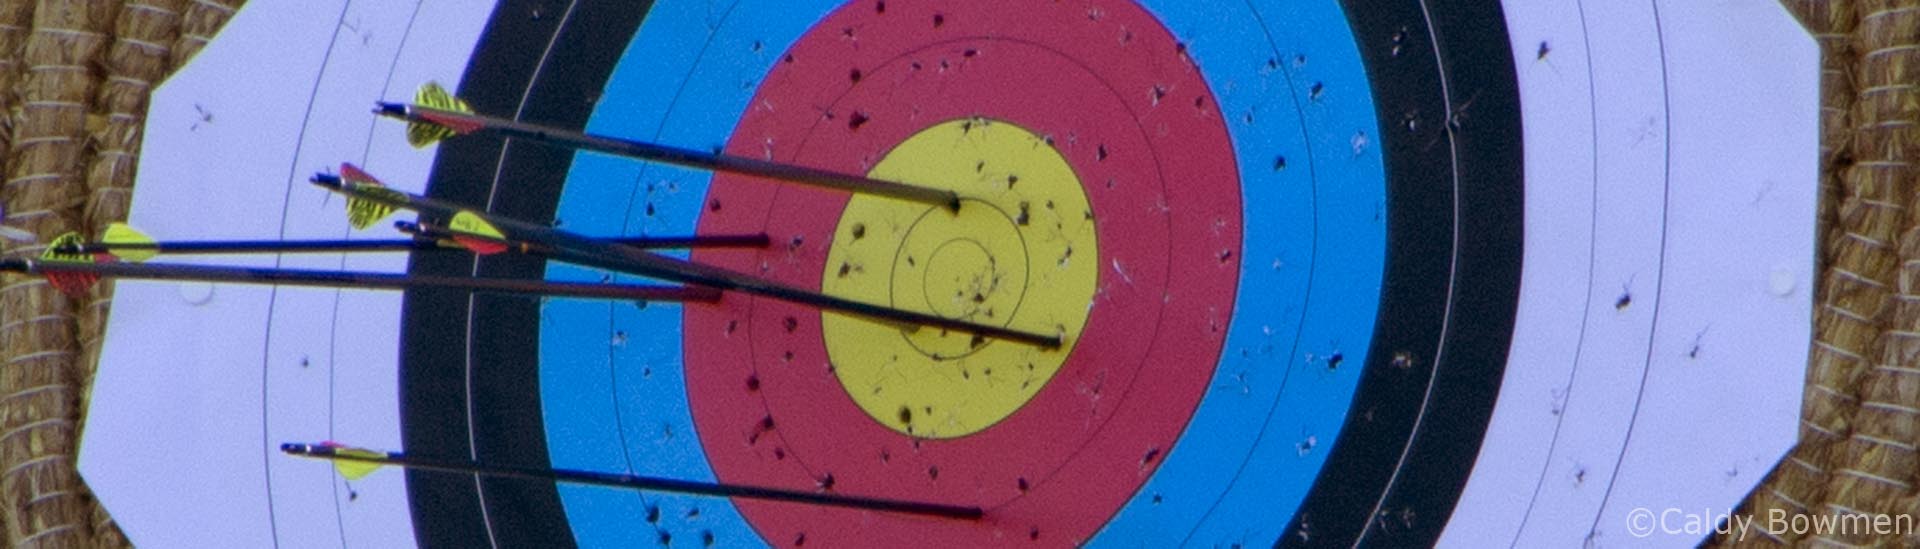 slideshow target face with arrows